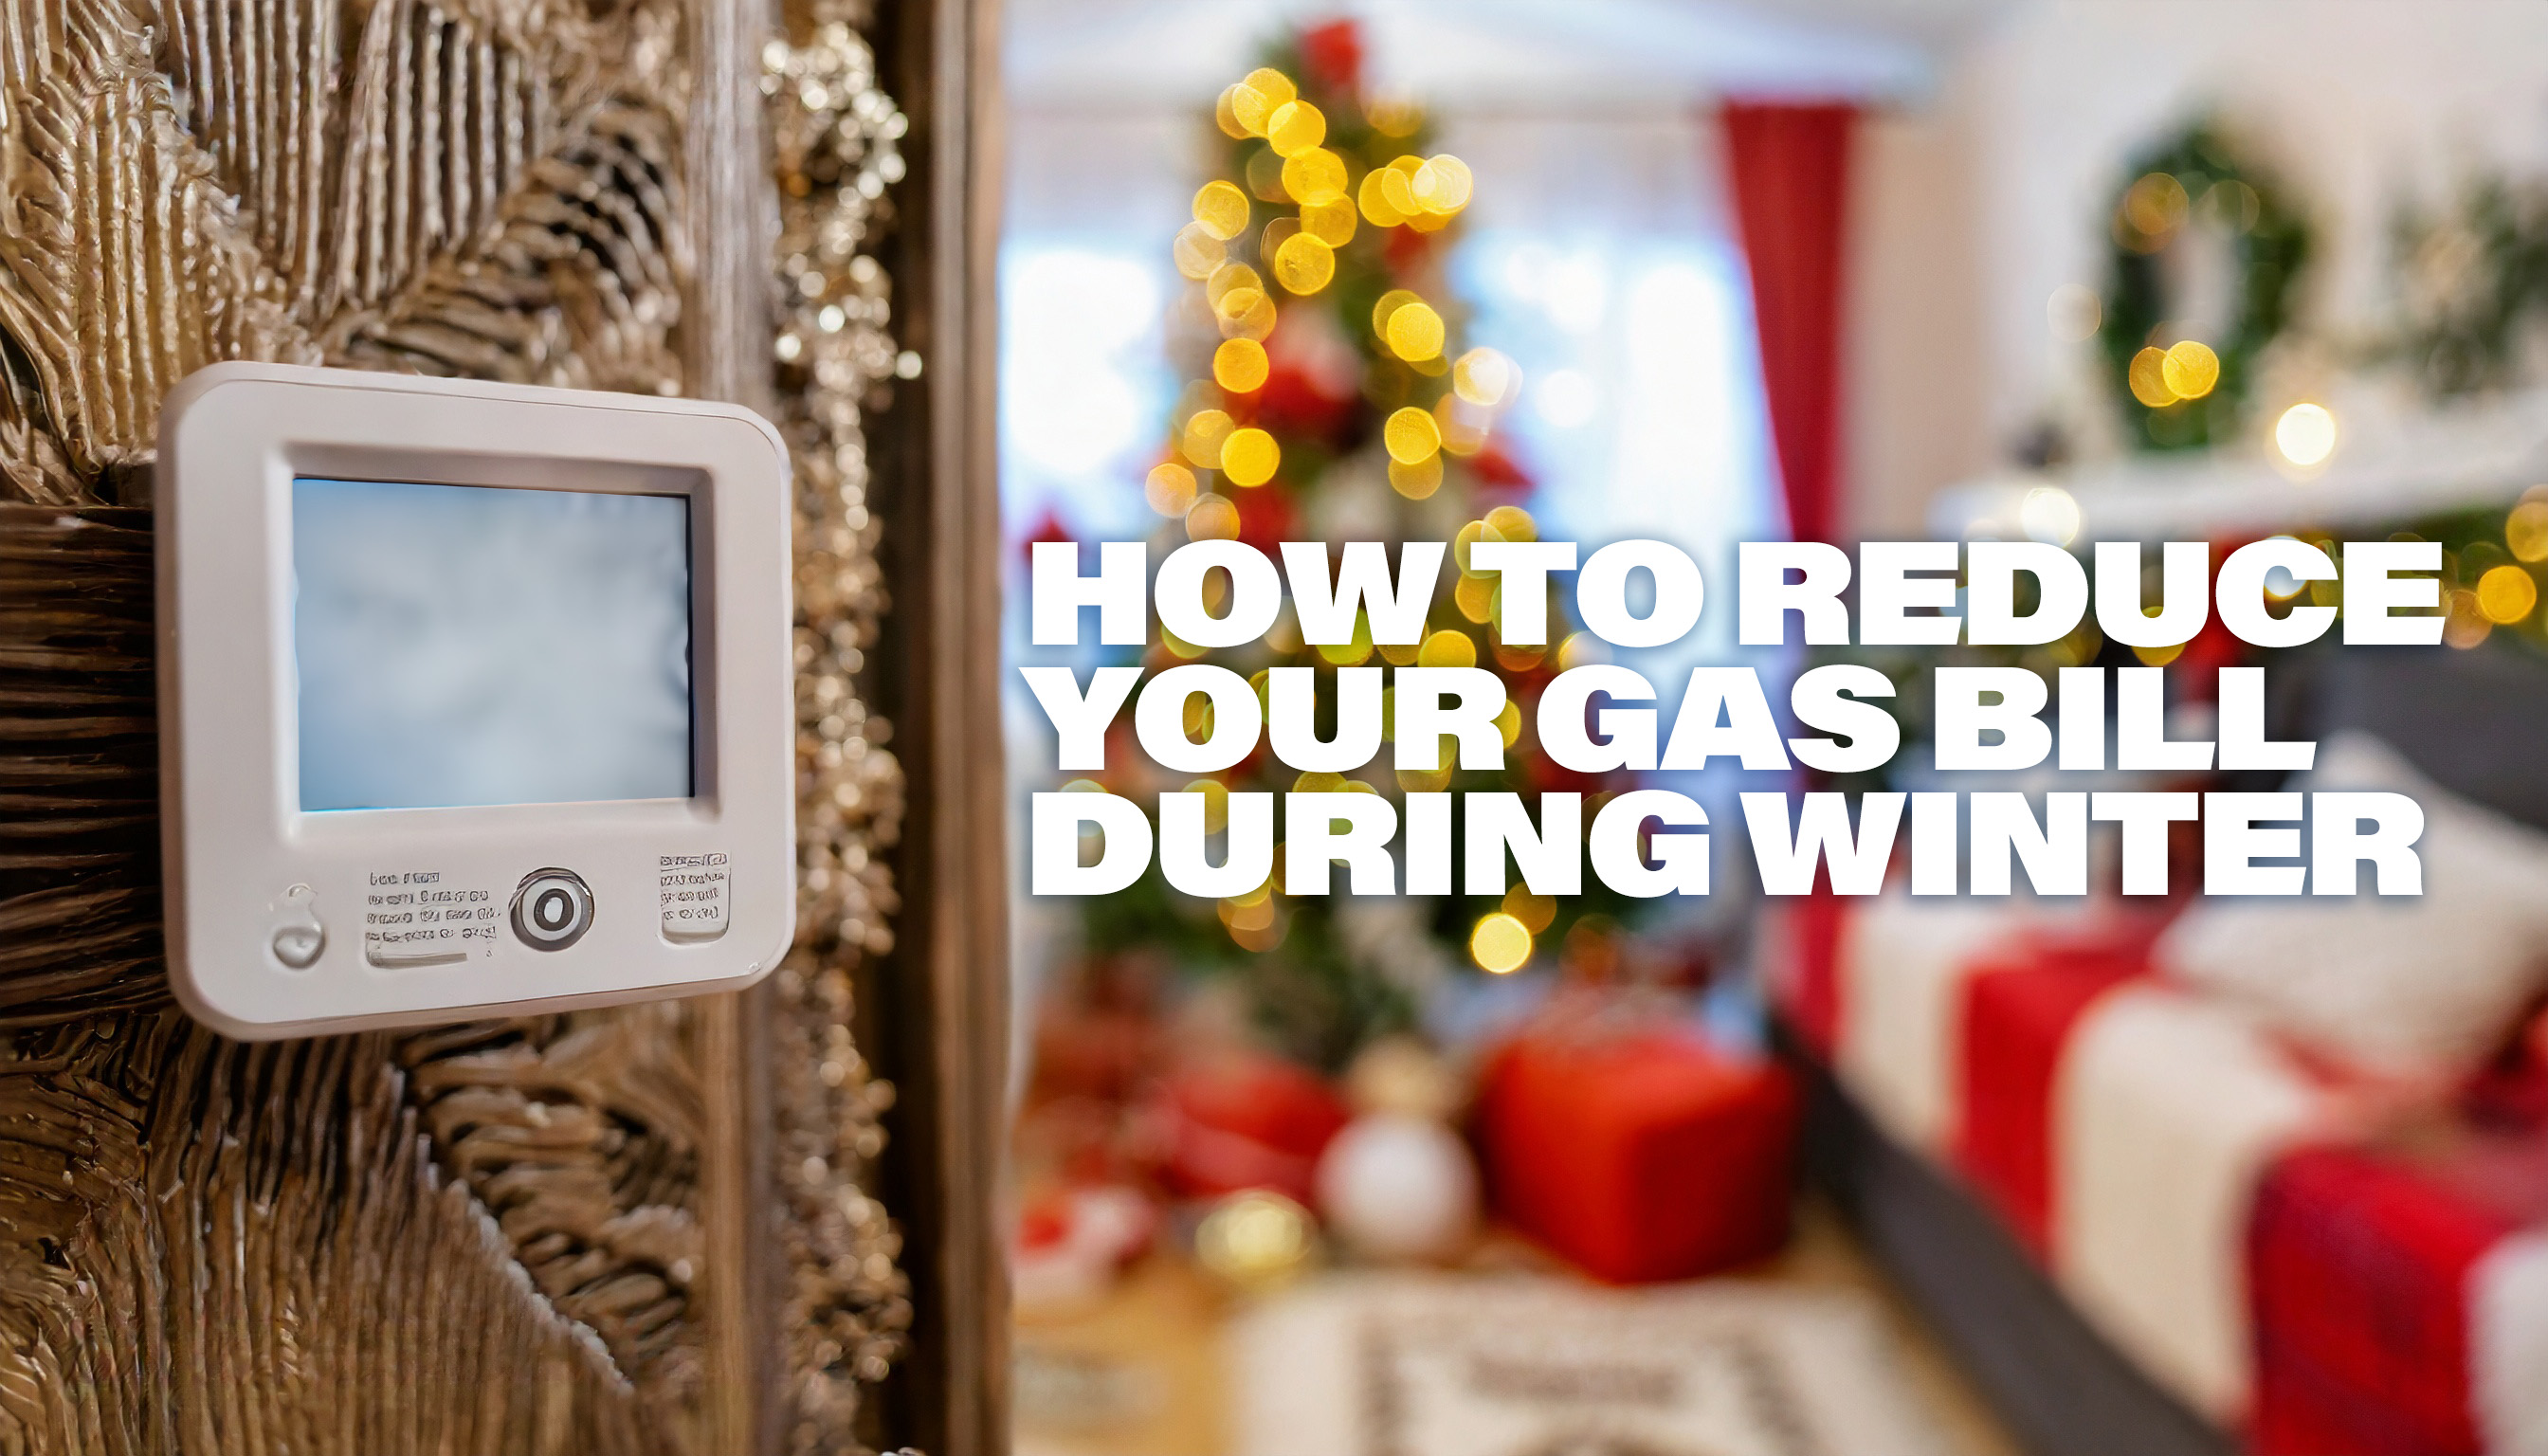 How to reduce your gas bill during winter.jpg